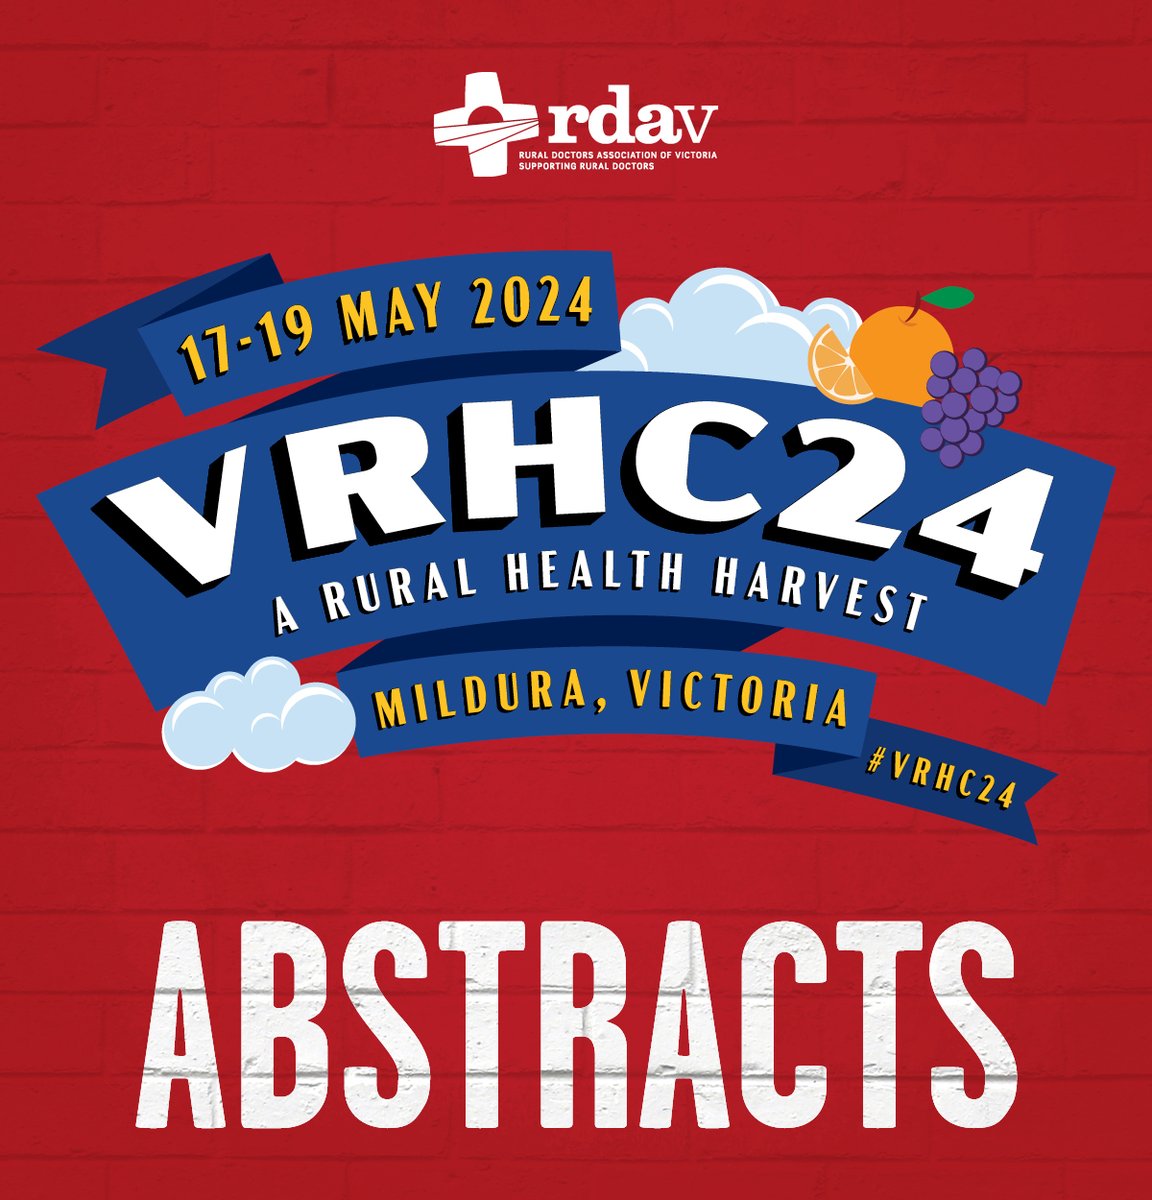 Only 1 week until abstracts close to present at the Victorian Rural Health Conference 2024. Program is packed with great sessions-but there is room for more. More info & register to attend bit.ly/476kxt4 @RACGP @ACRRM @MonashRural @SaferCareVic @MelbConventions